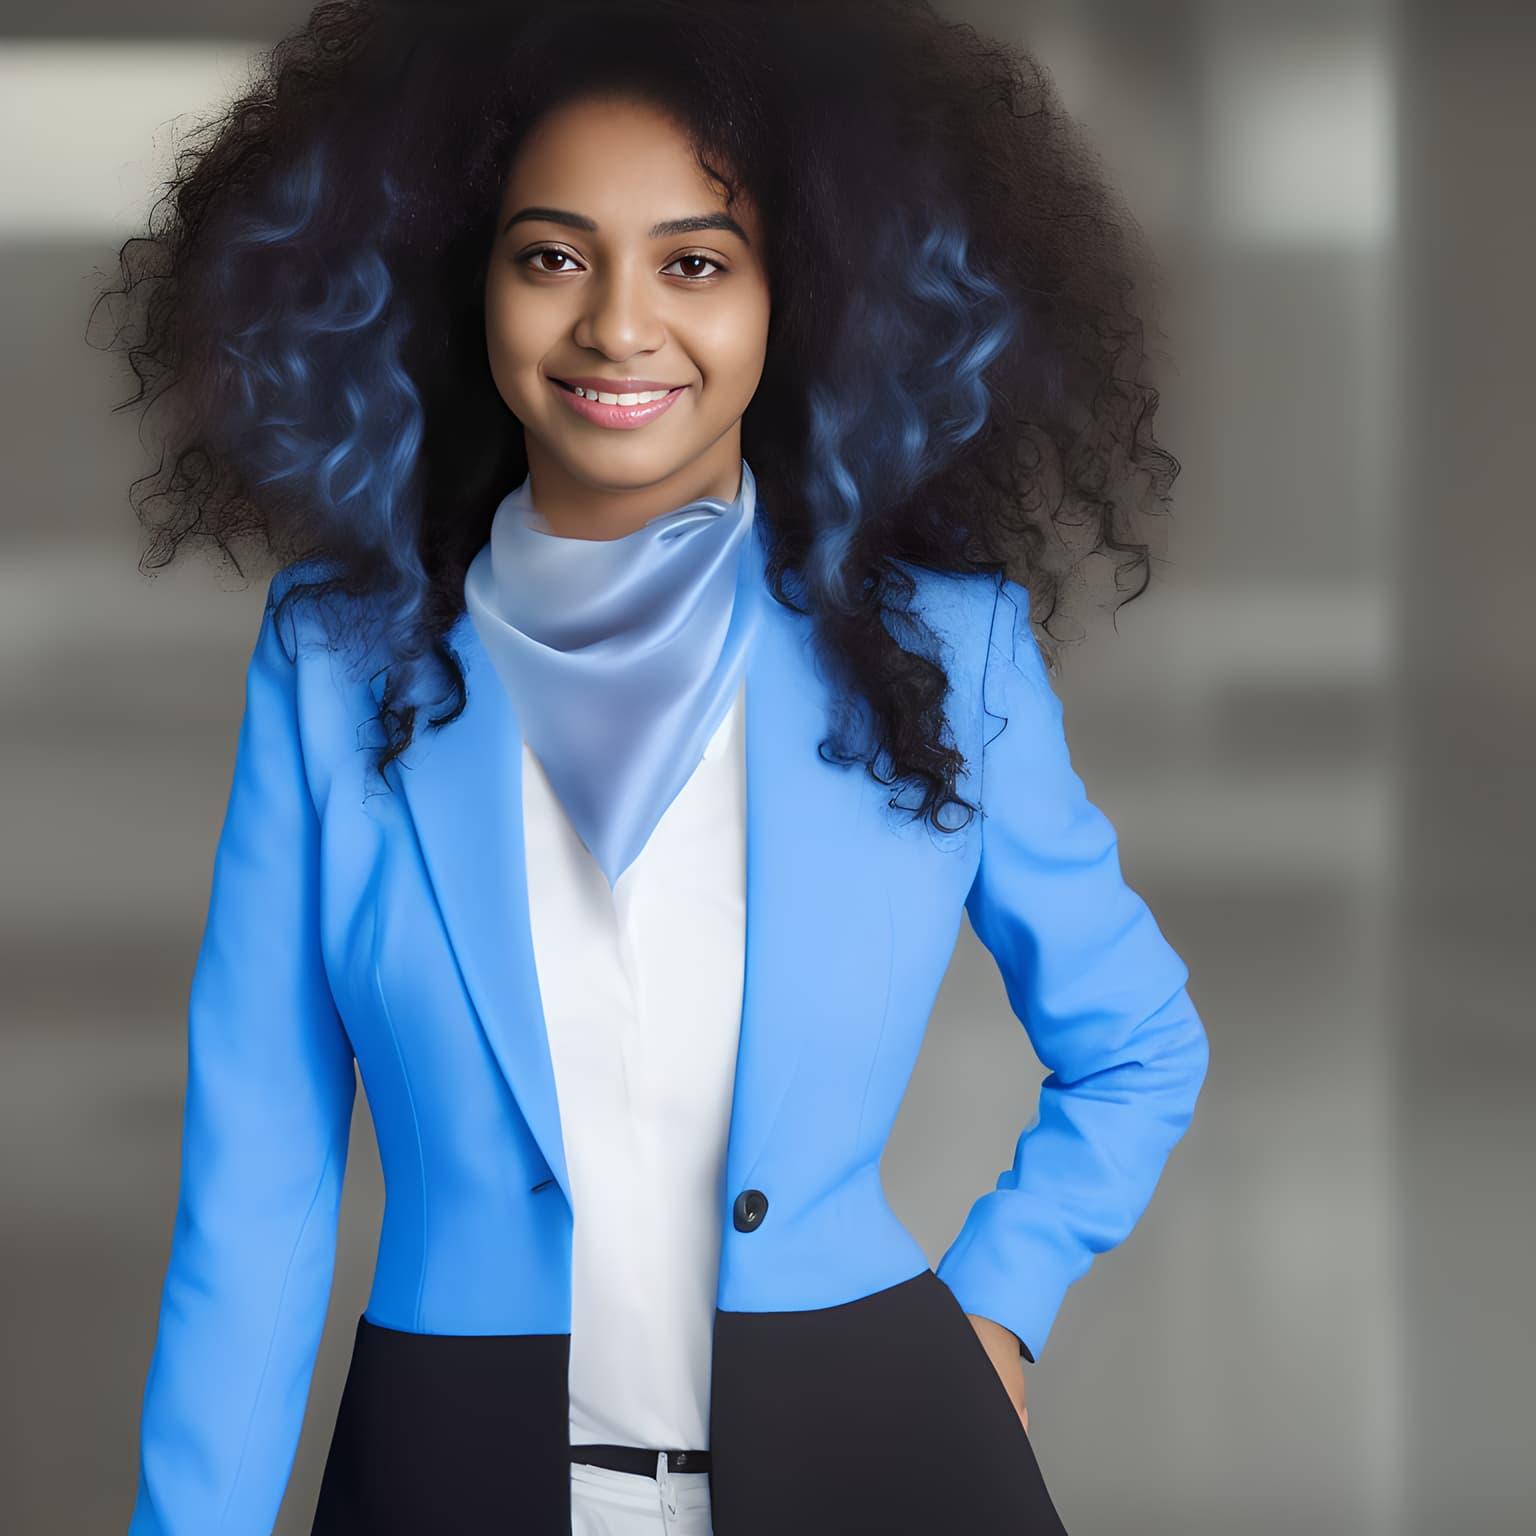 A twenty-something woman with black curly hair and blue highlights, brown skin, a black and blue suit, and a blue skirt scarf around her neck - smiling and standing